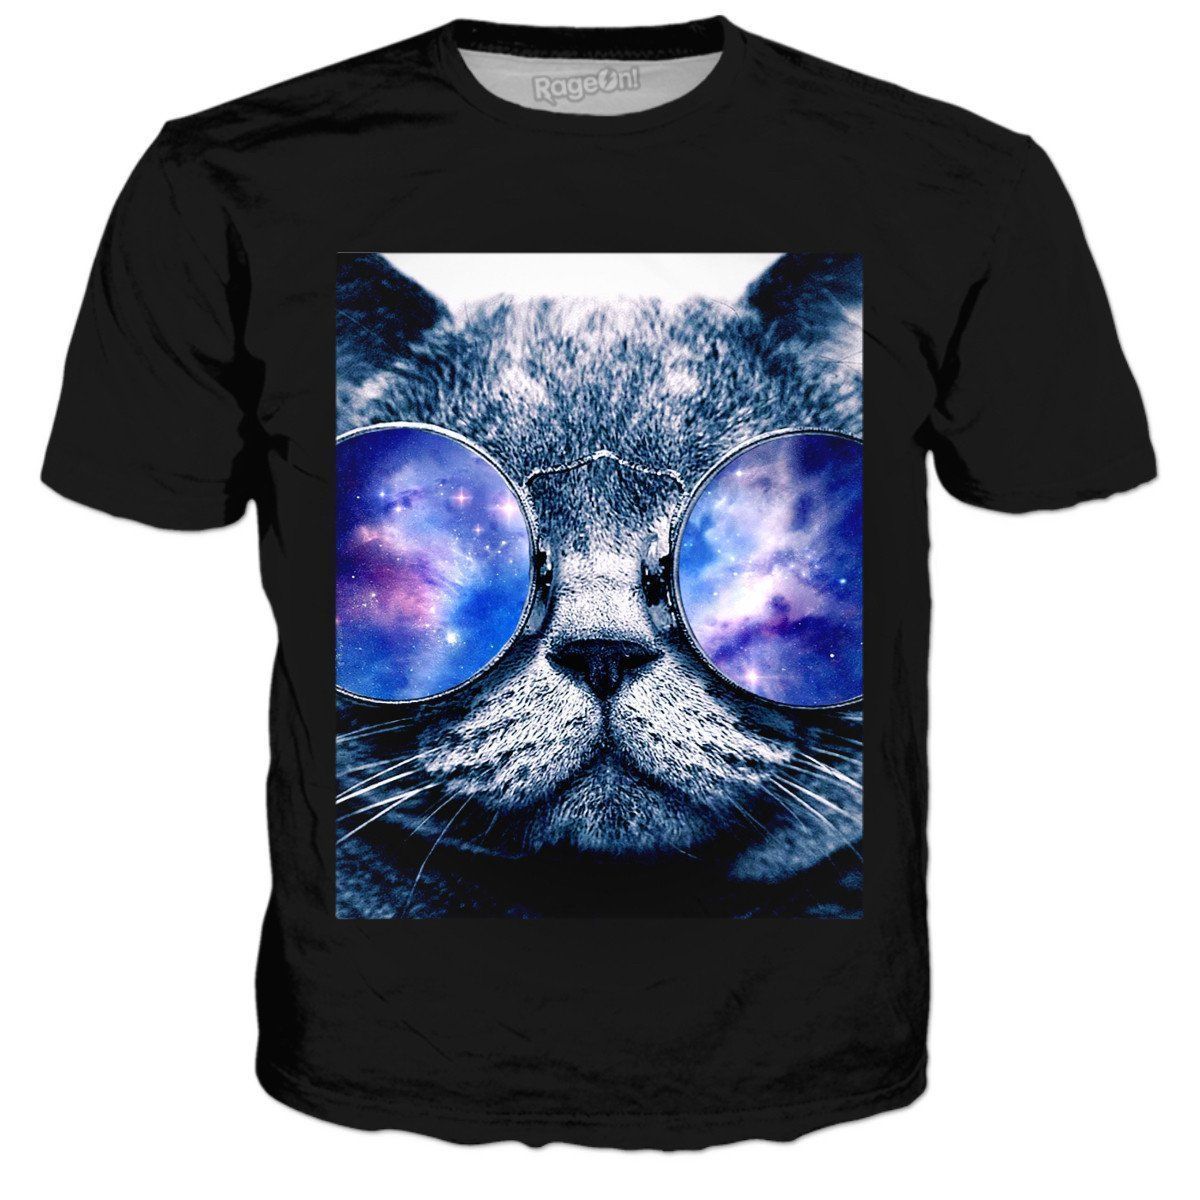 Rageon Classic Black/white All Over Print T-shirts